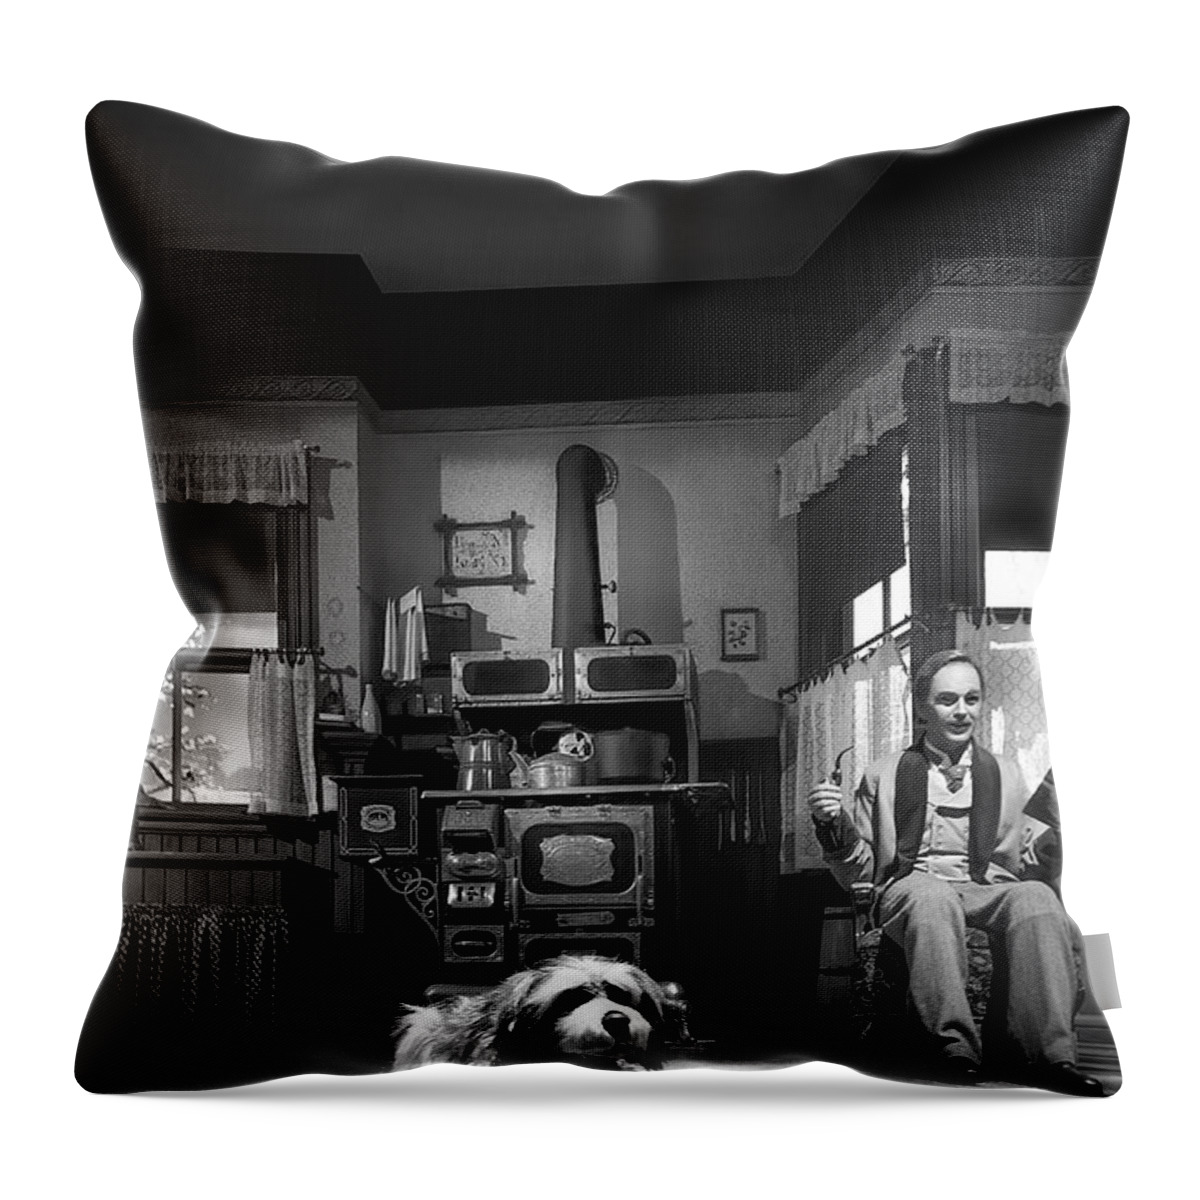 Carousel Of Progress Throw Pillow featuring the photograph Carousel of Progress Scene 1 by Mark Andrew Thomas